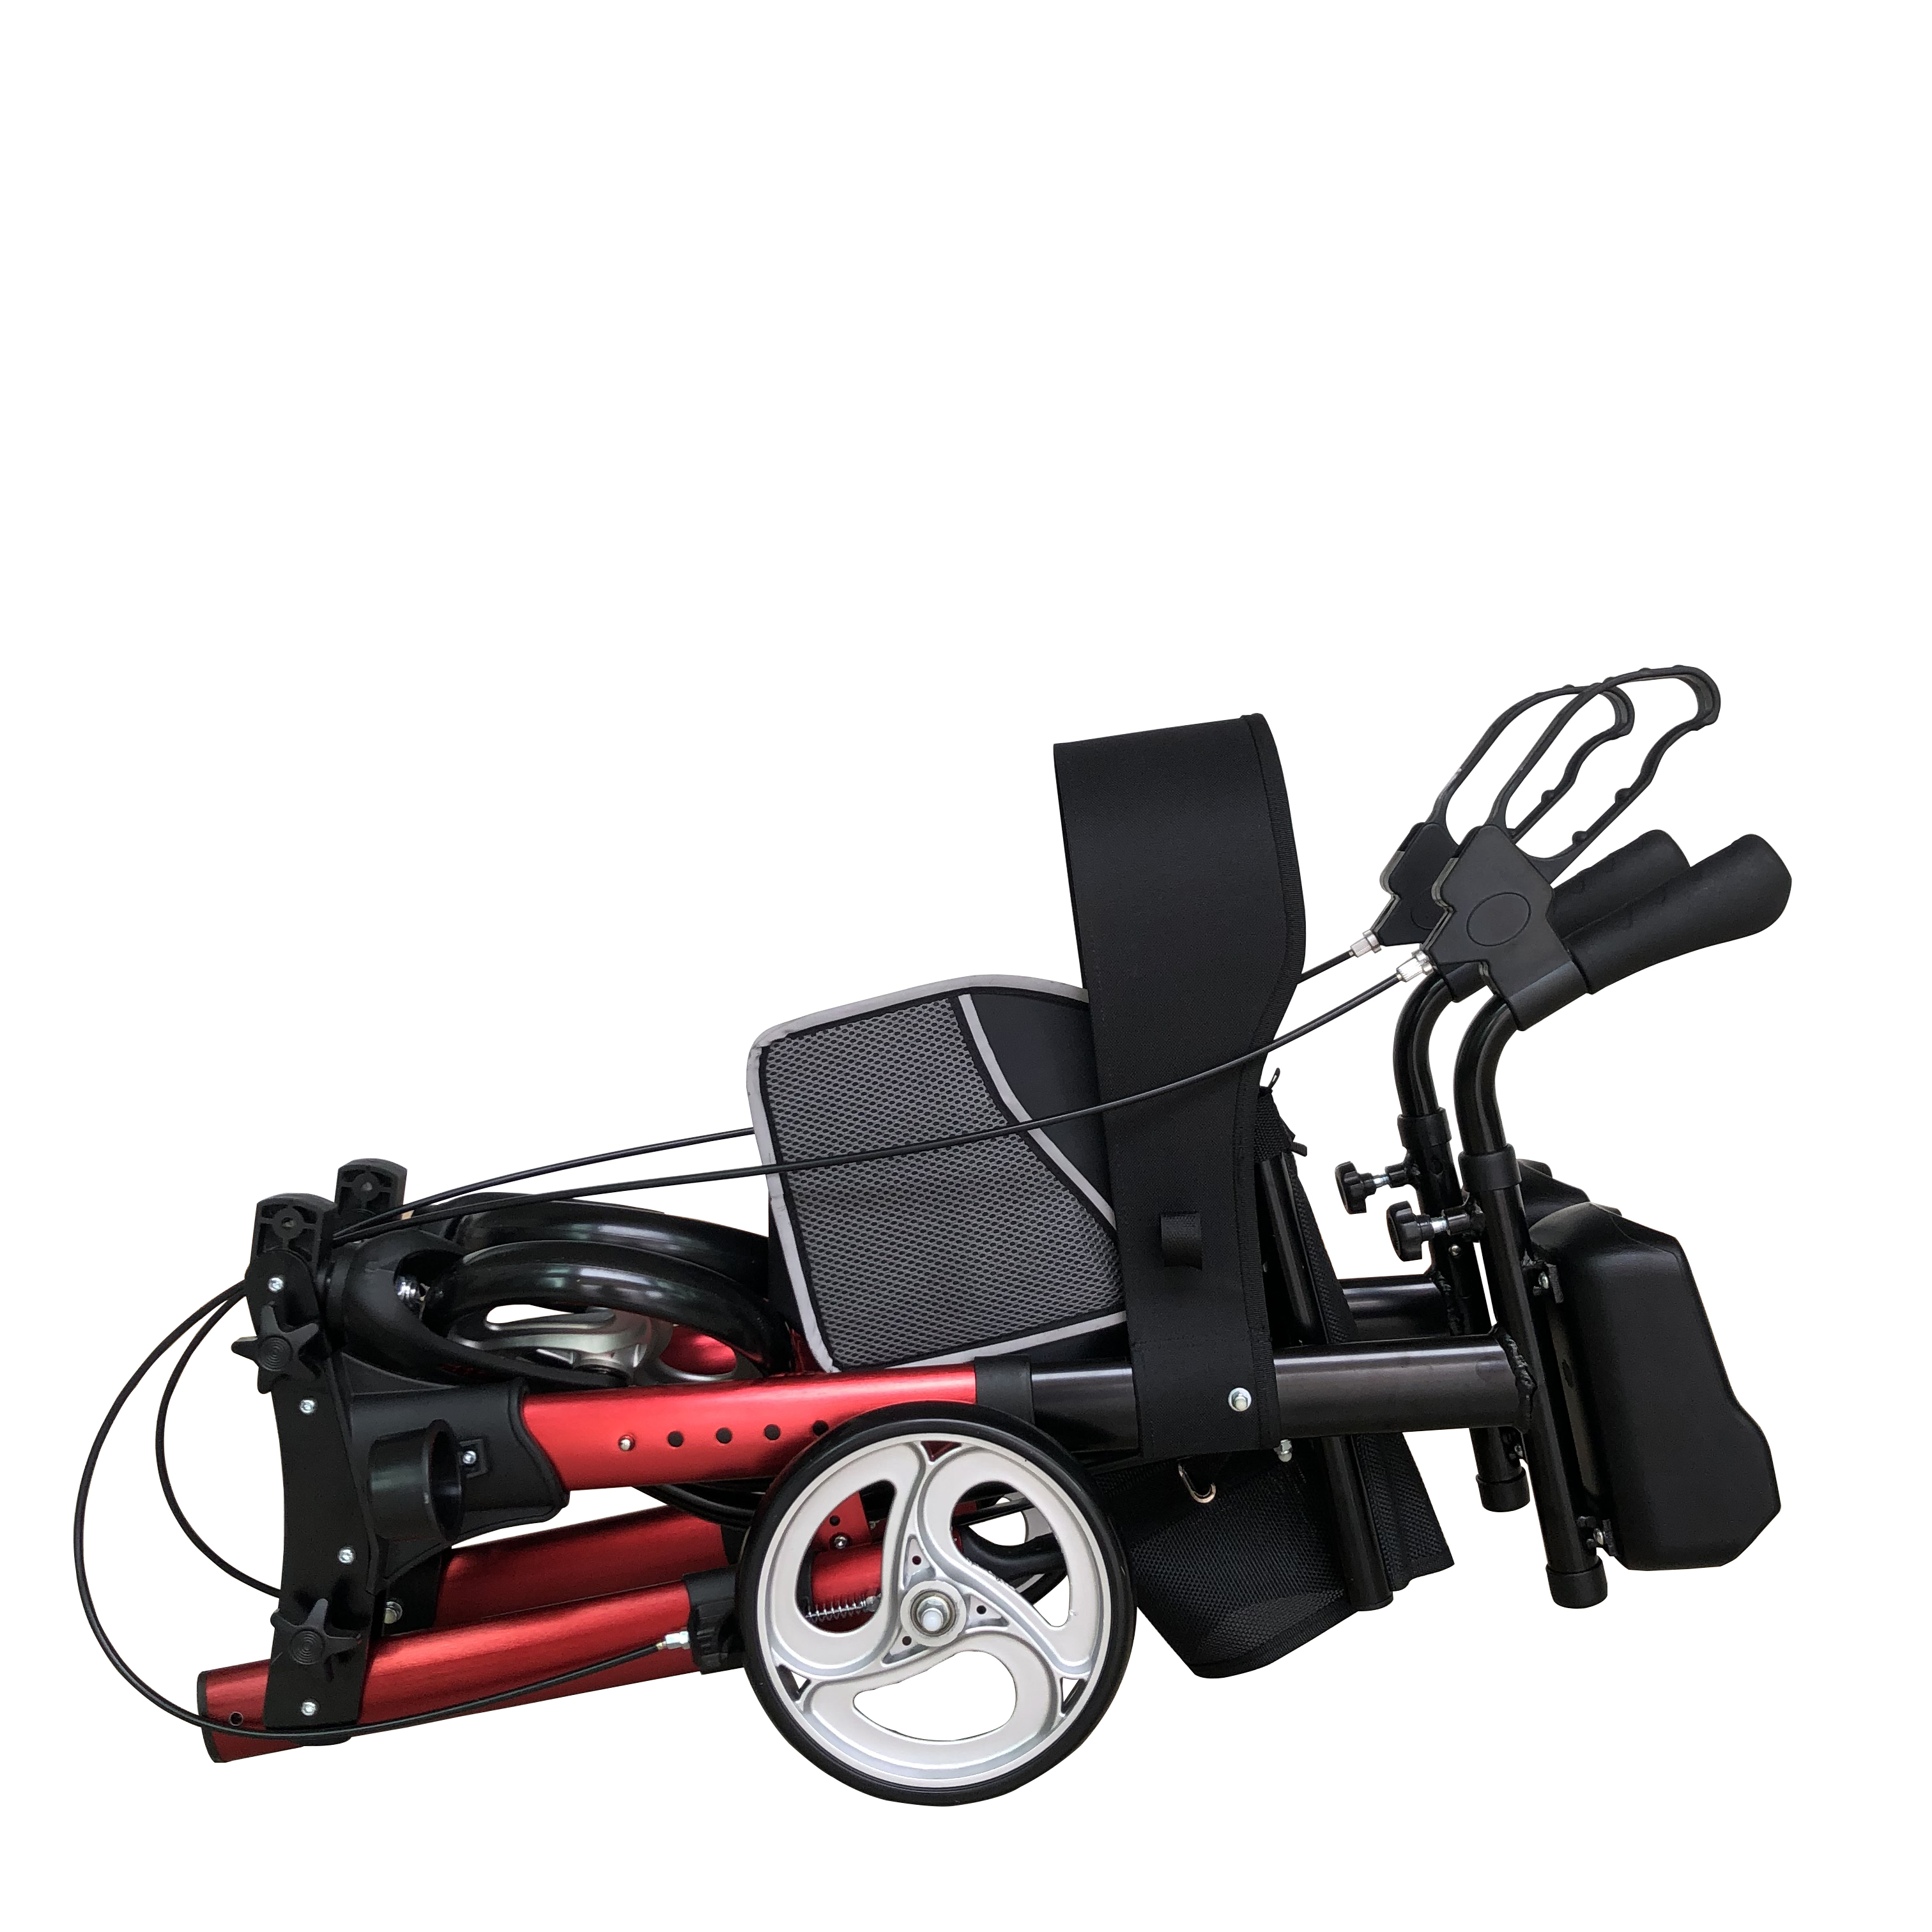 Aluminum Upright Rollator Walkers with Armrests, Handrails and Cup Holder